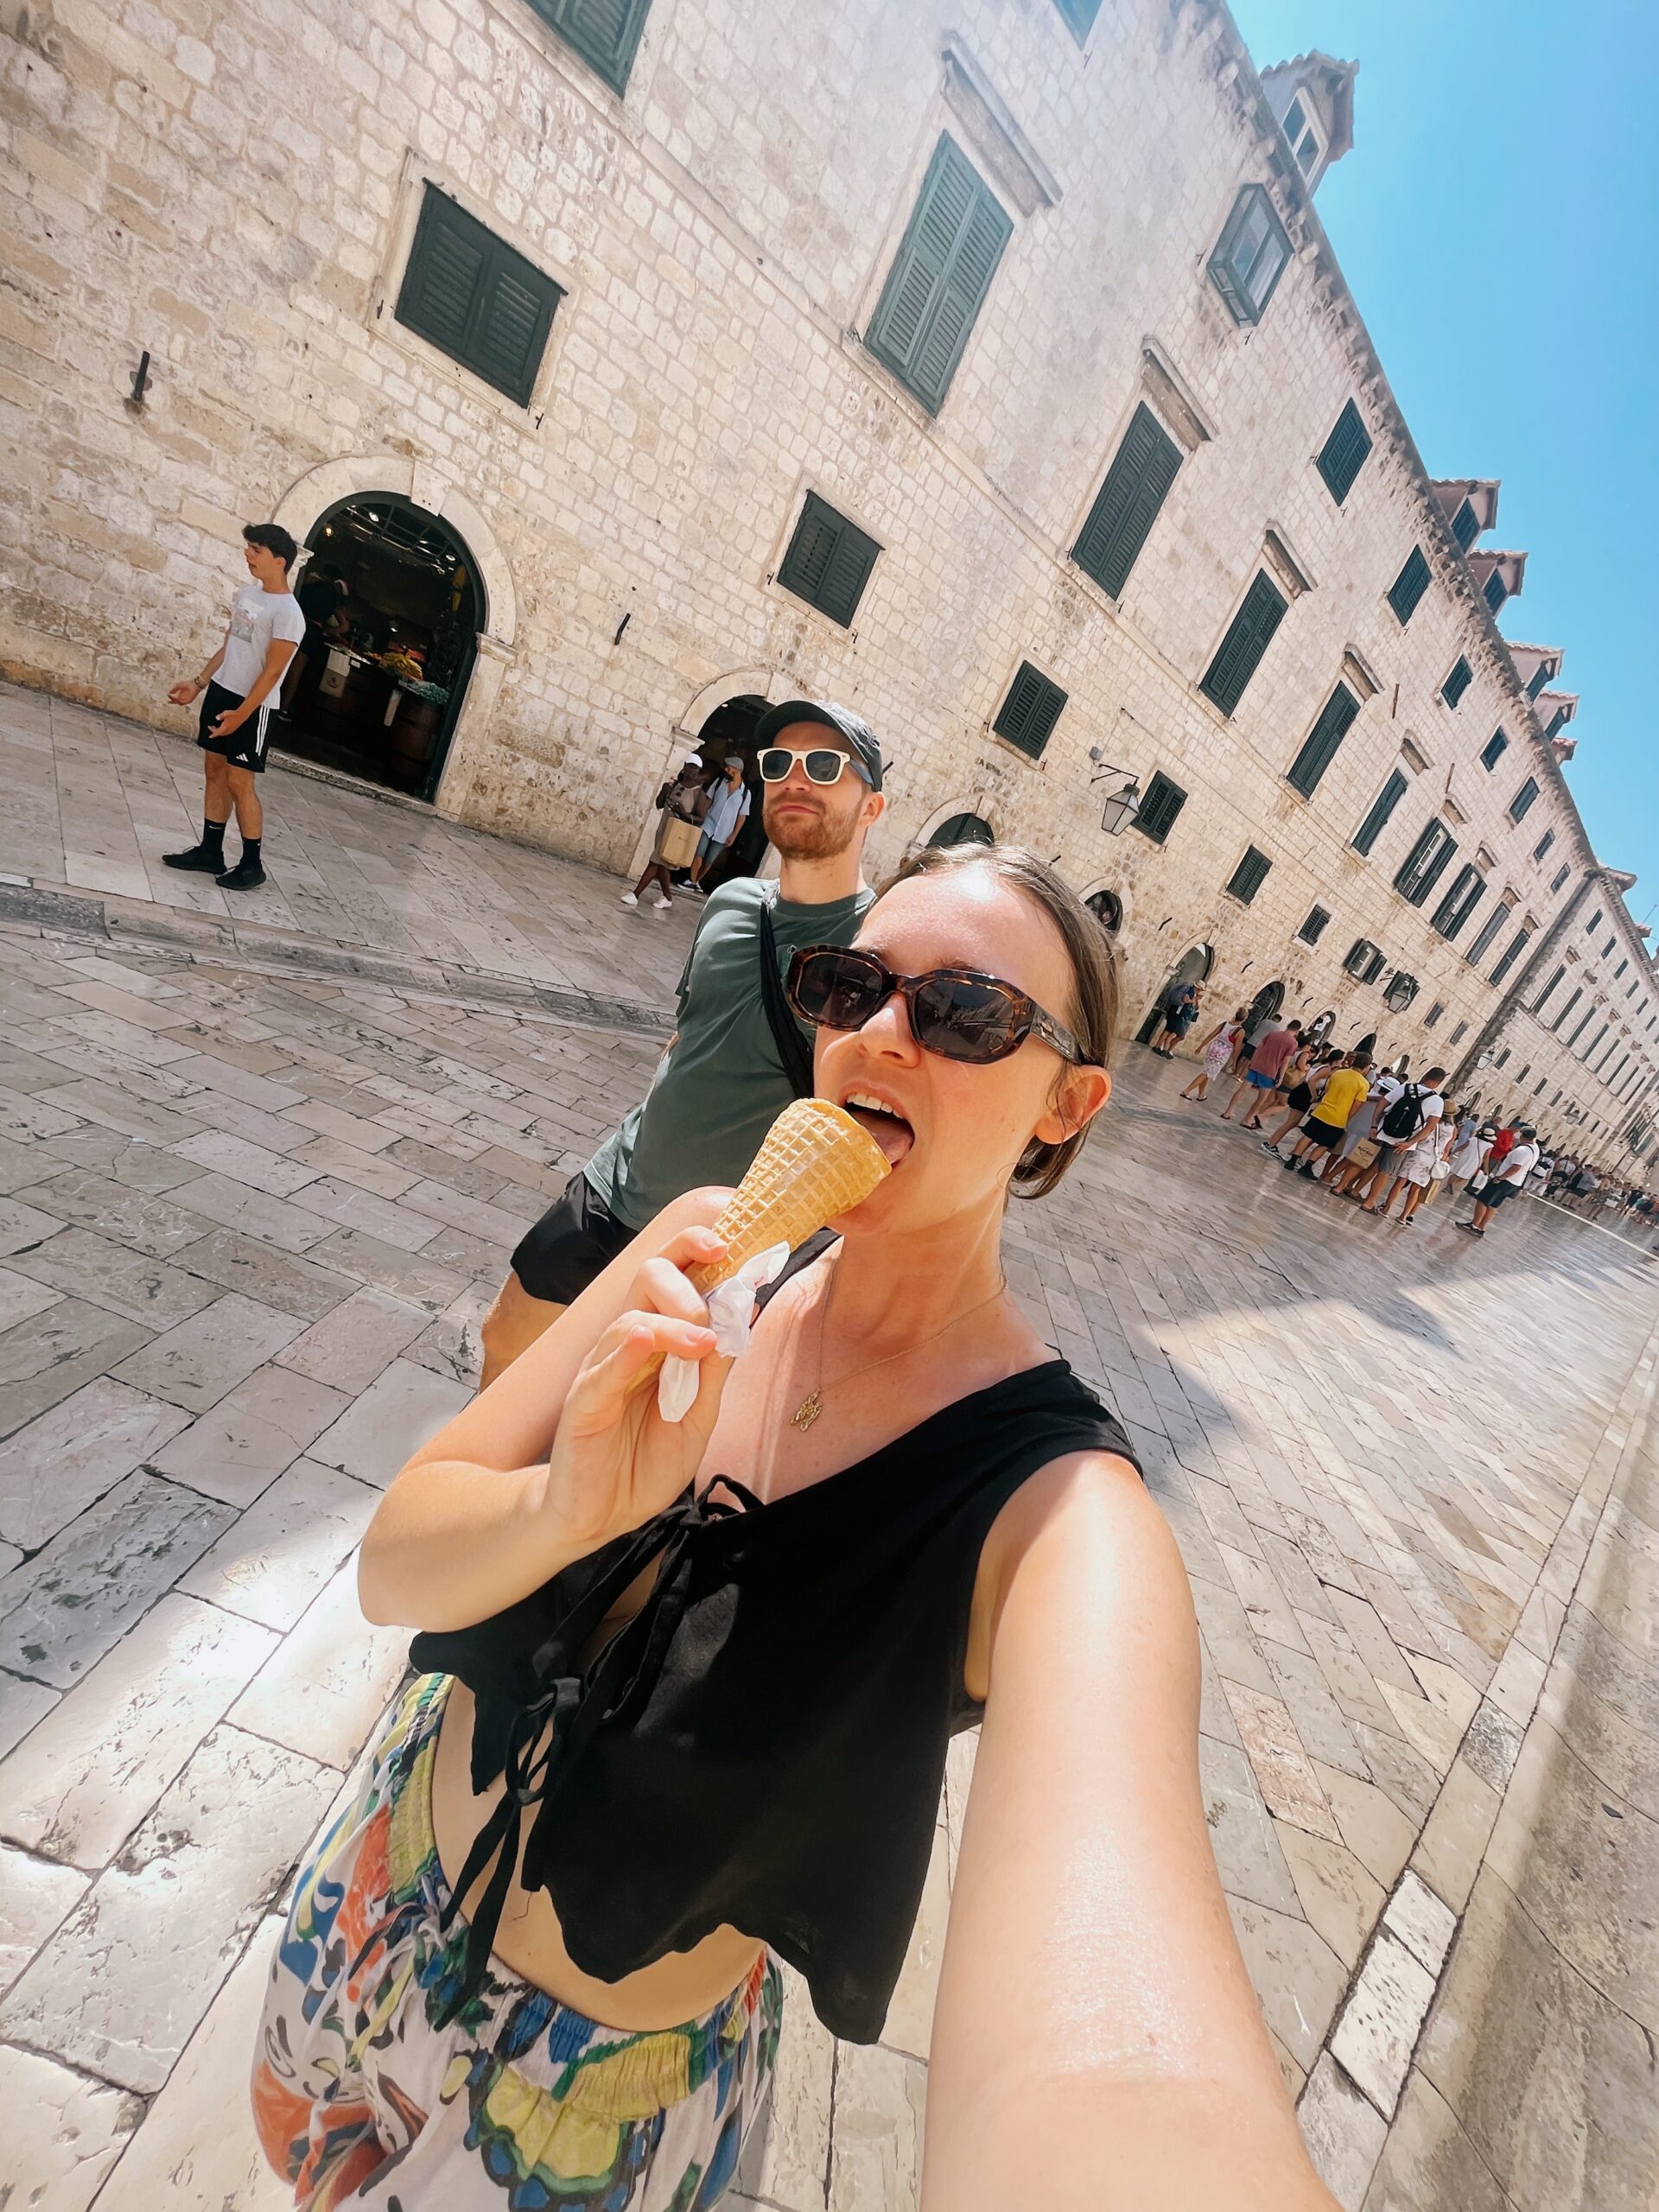 Holly and phil eating ice cream in dubrovnik city walls